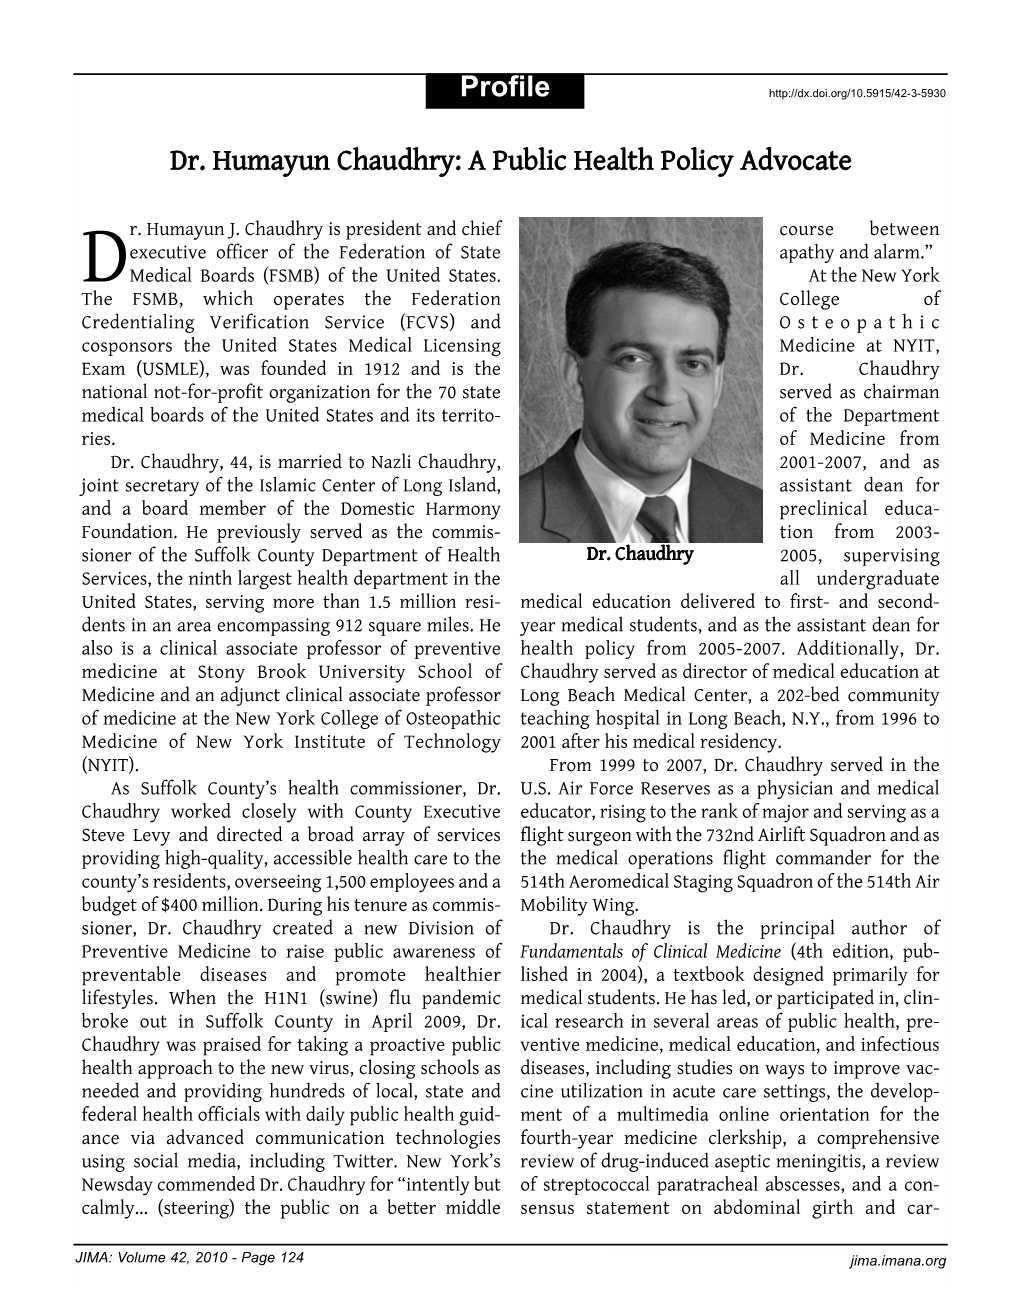 Dr. Humayun J. Chaudhry Is President and Chief